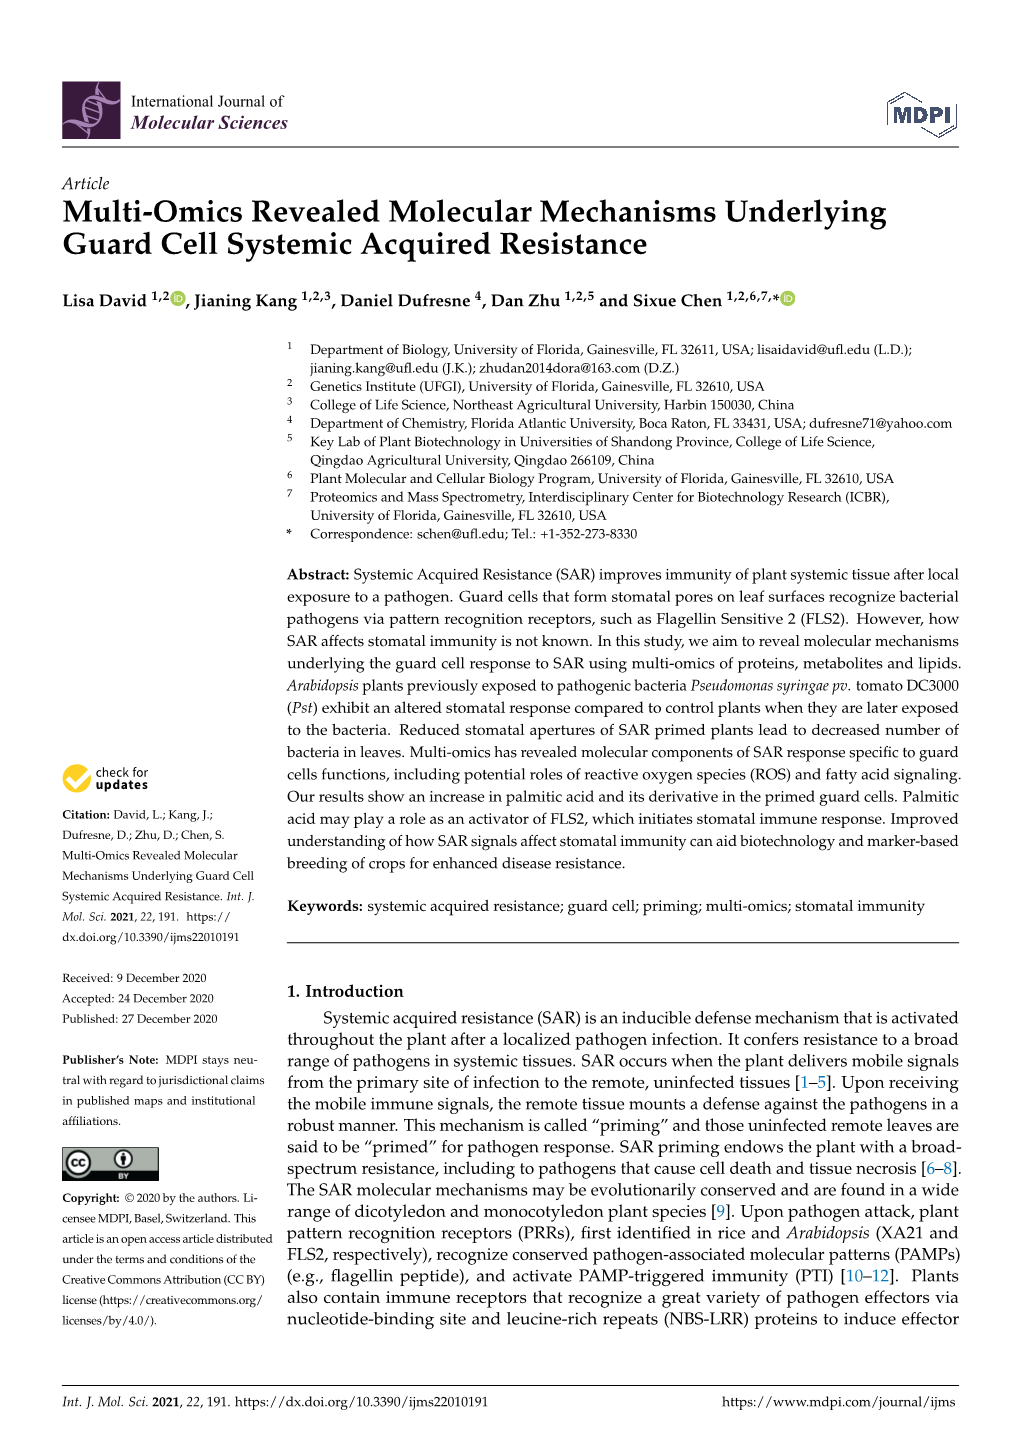 Multi-Omics Revealed Molecular Mechanisms Underlying Guard Cell Systemic Acquired Resistance